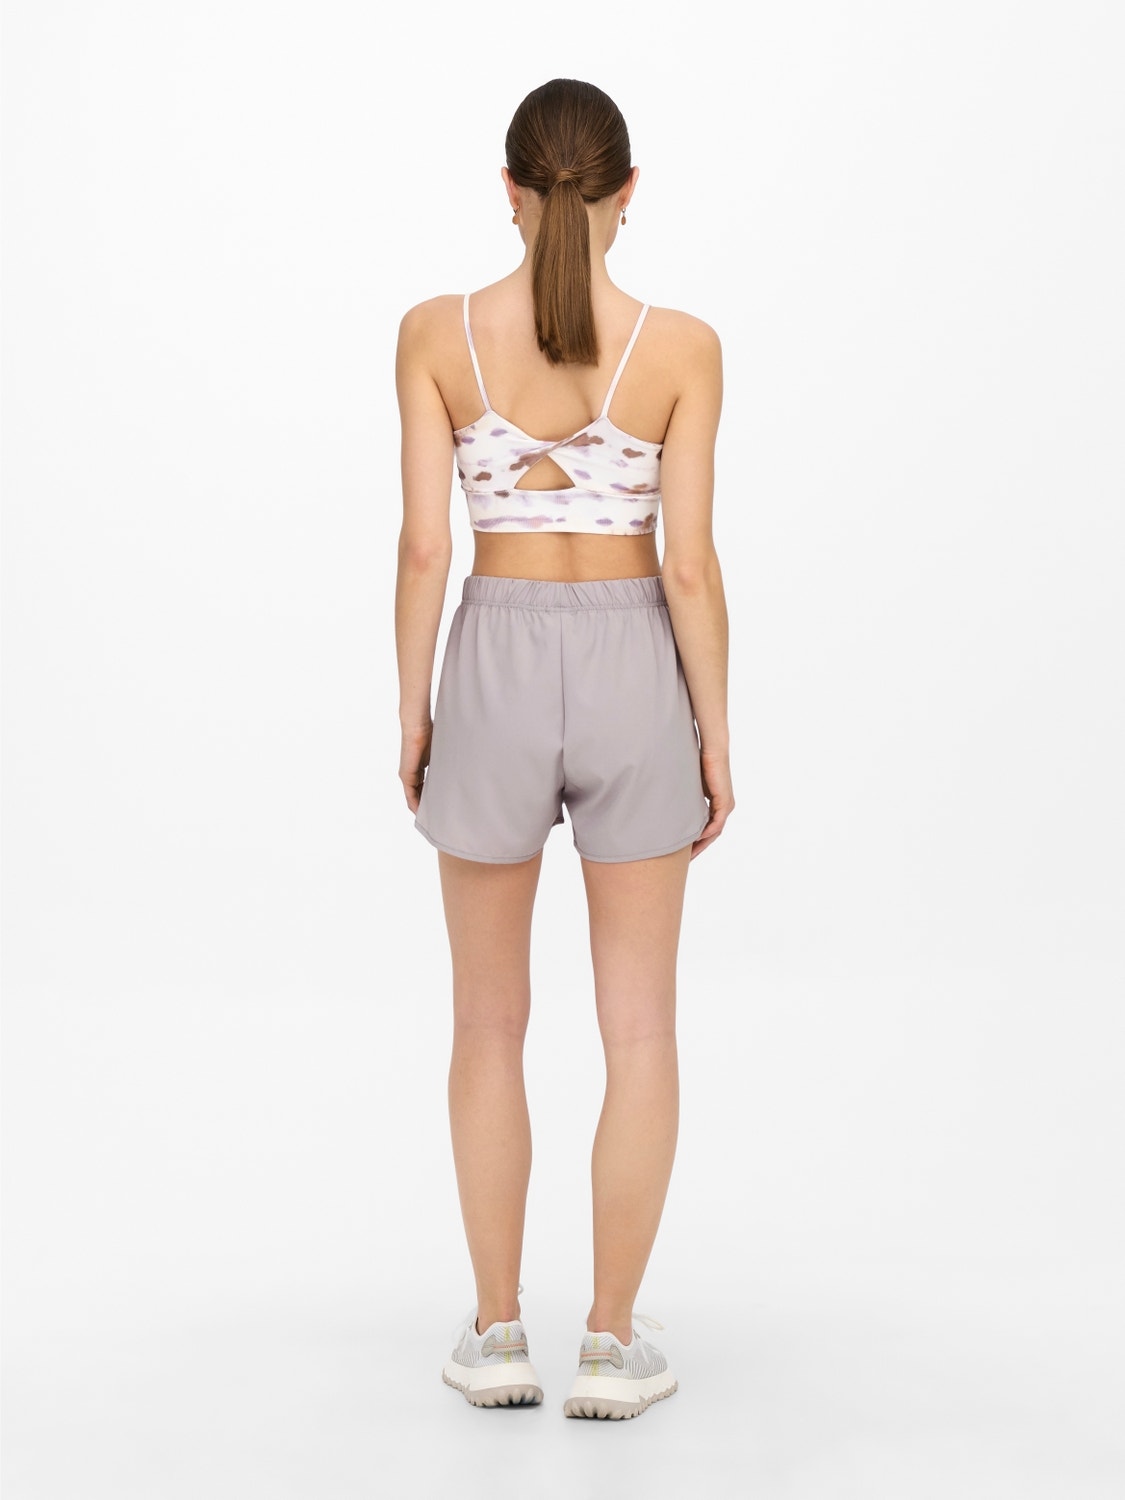 ONLY Loose Fit Mid waist Shorts -Gull Gray - 15244492